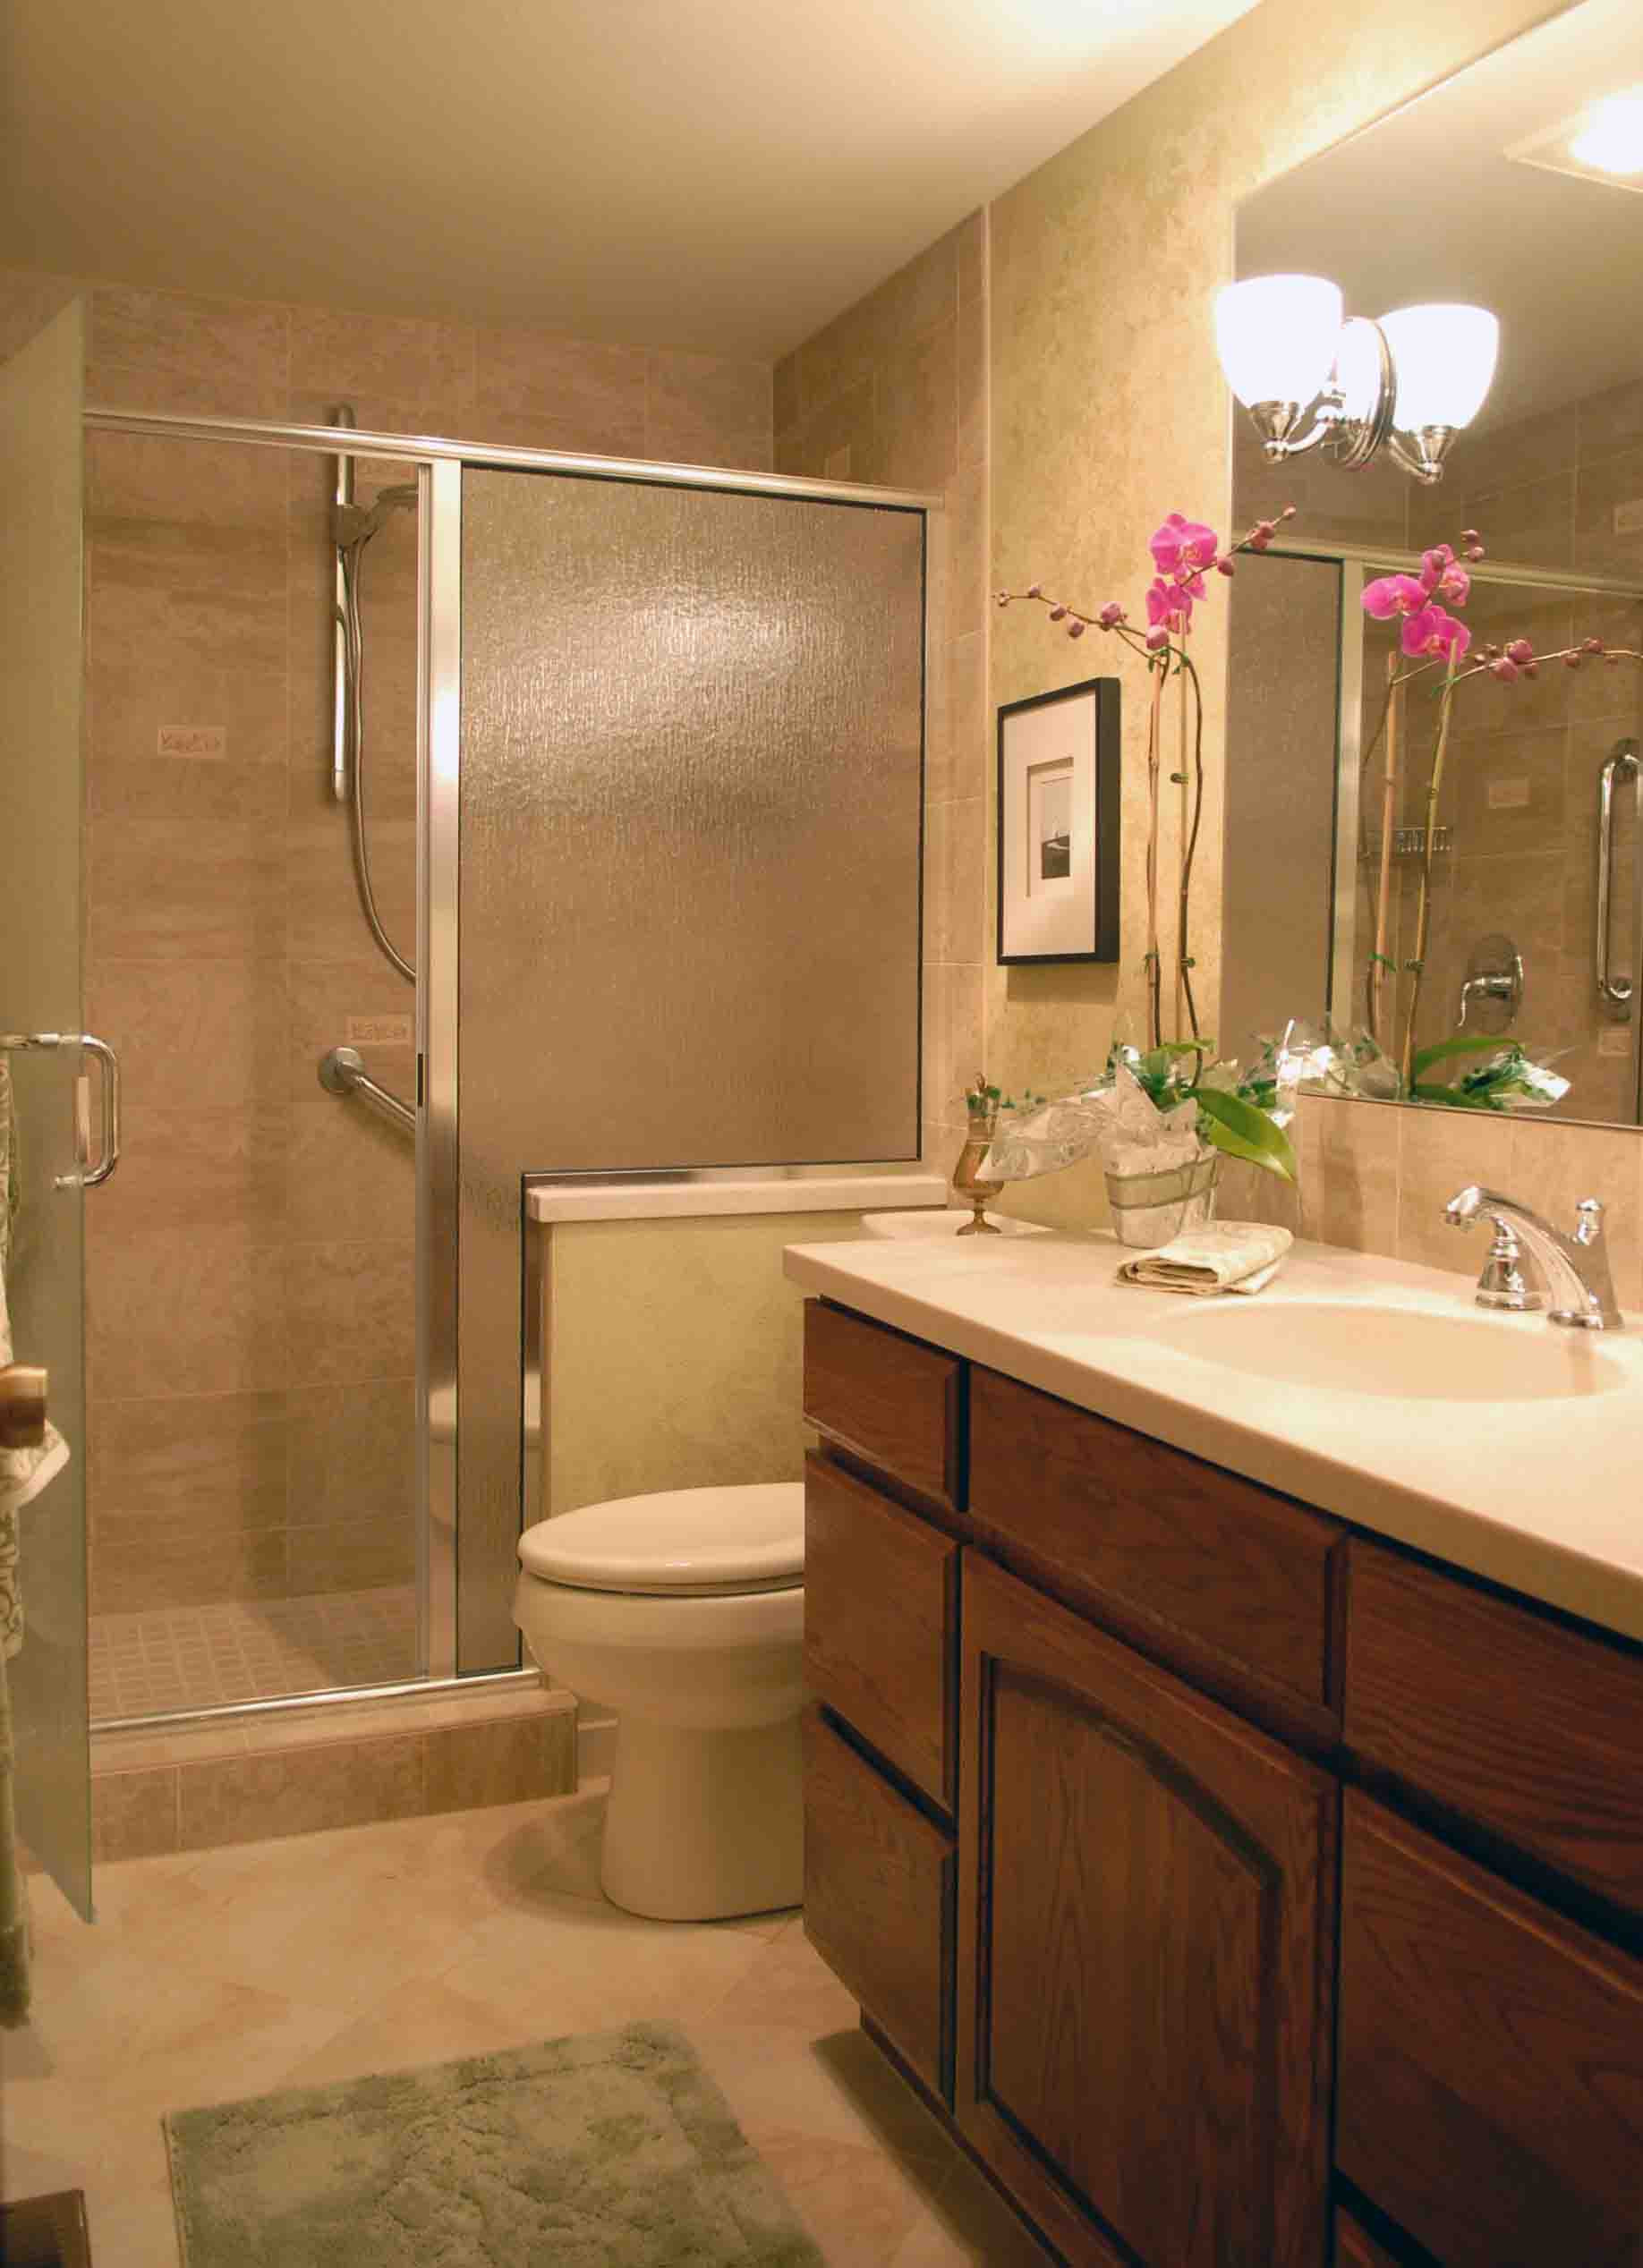 Remodeling Small Bathroom
 Bathroom Remodeling Ideas for Small Bath TheyDesign